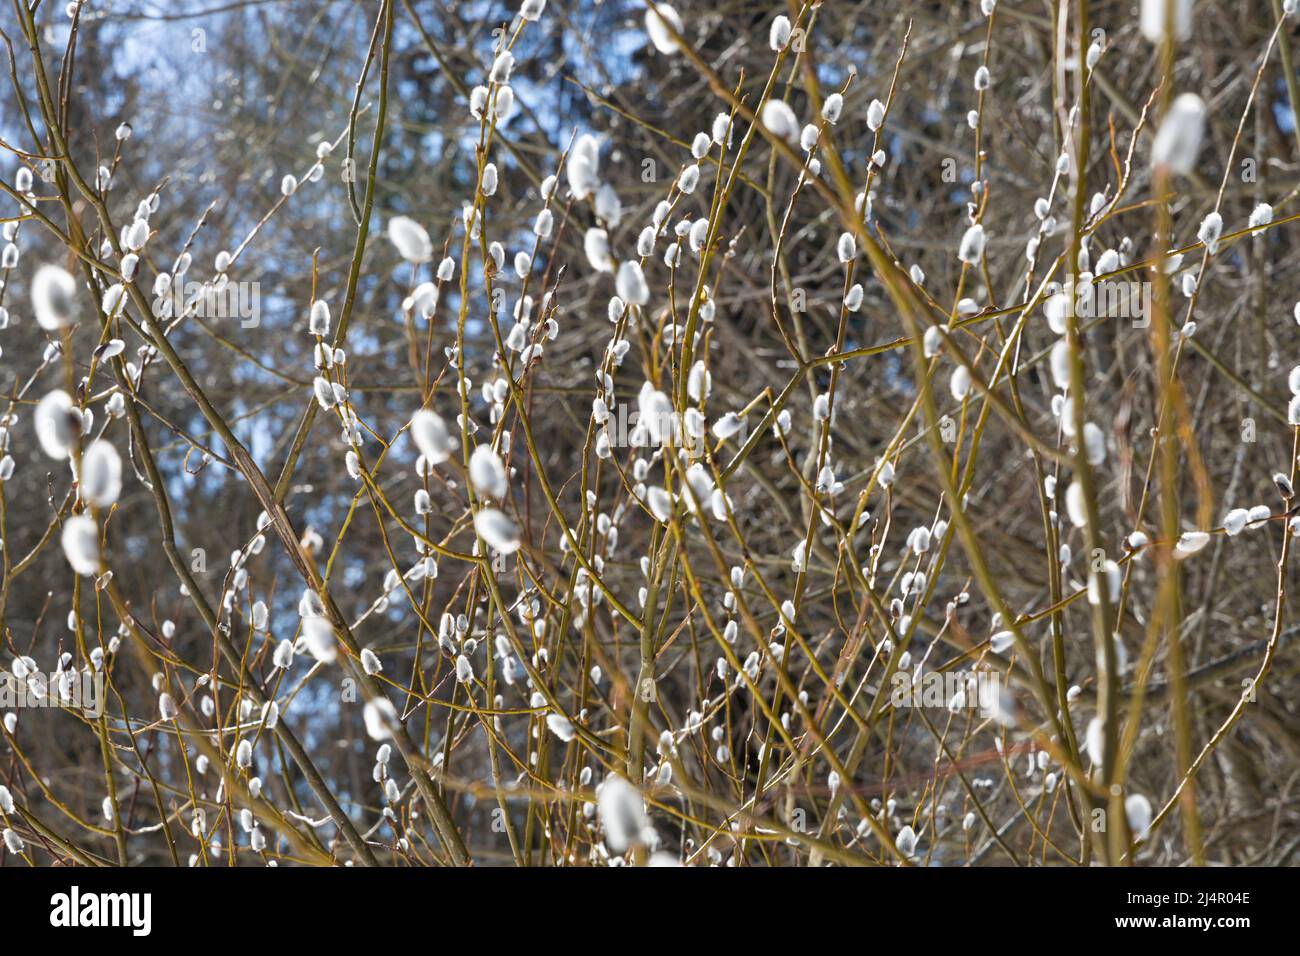 Lot of fluffy white buds on a willow bush in early spring Stock Photo